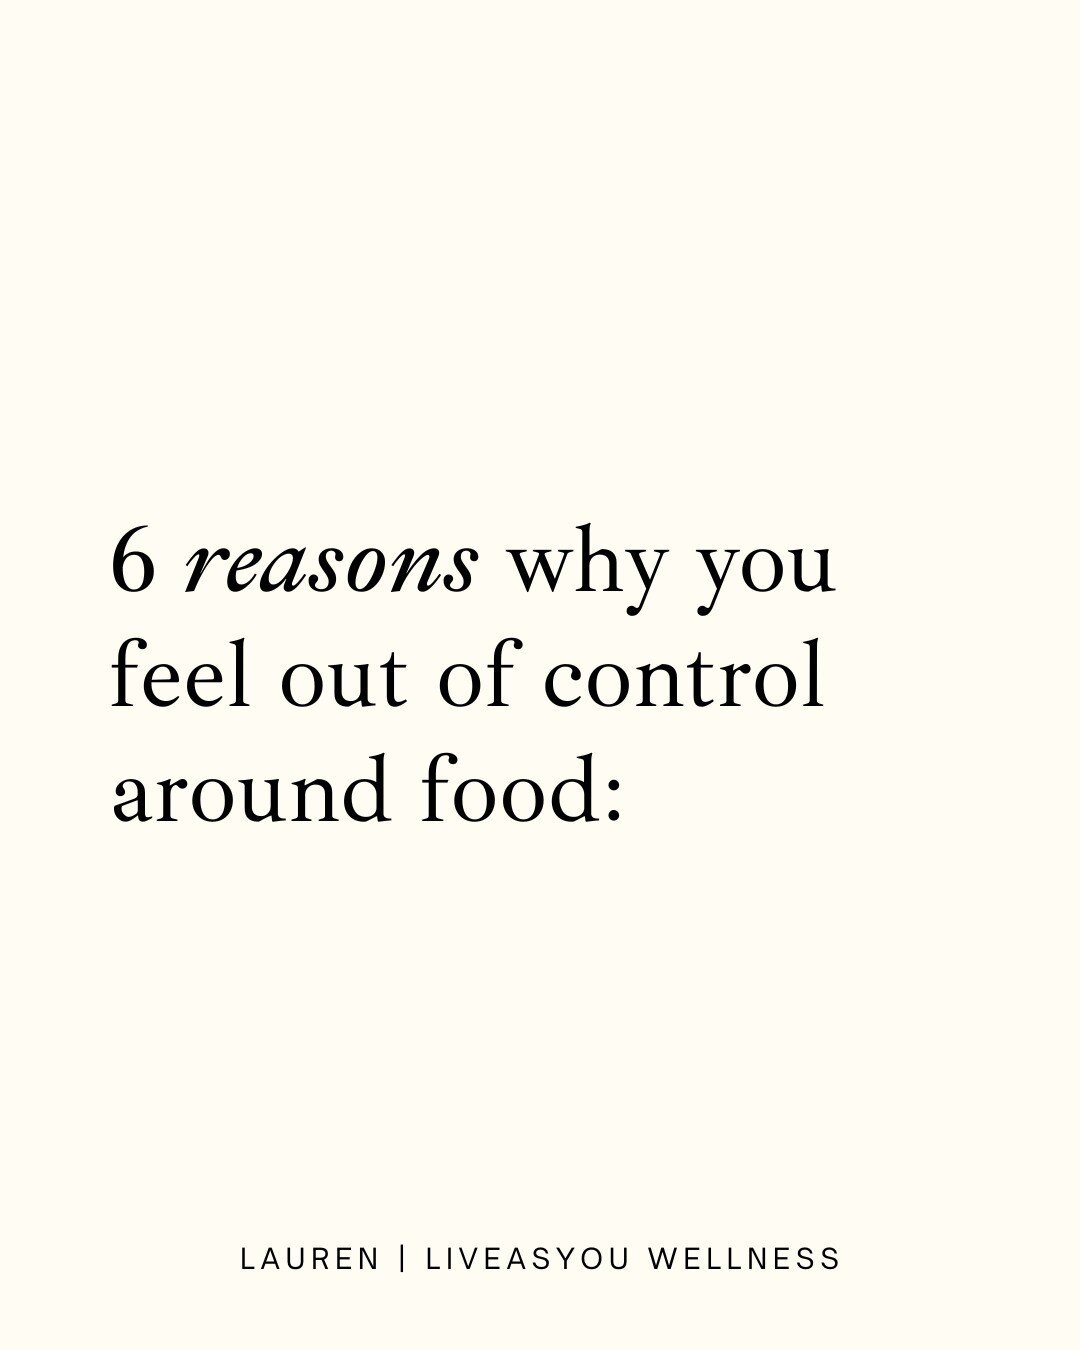 the main tenants of food freedom are releasing judgment and expectation around what, when, and how much you eat. it's not about being &quot;in control.&quot;

the more you try and gain &quot;control&quot; around food, the less likely you are to feel 